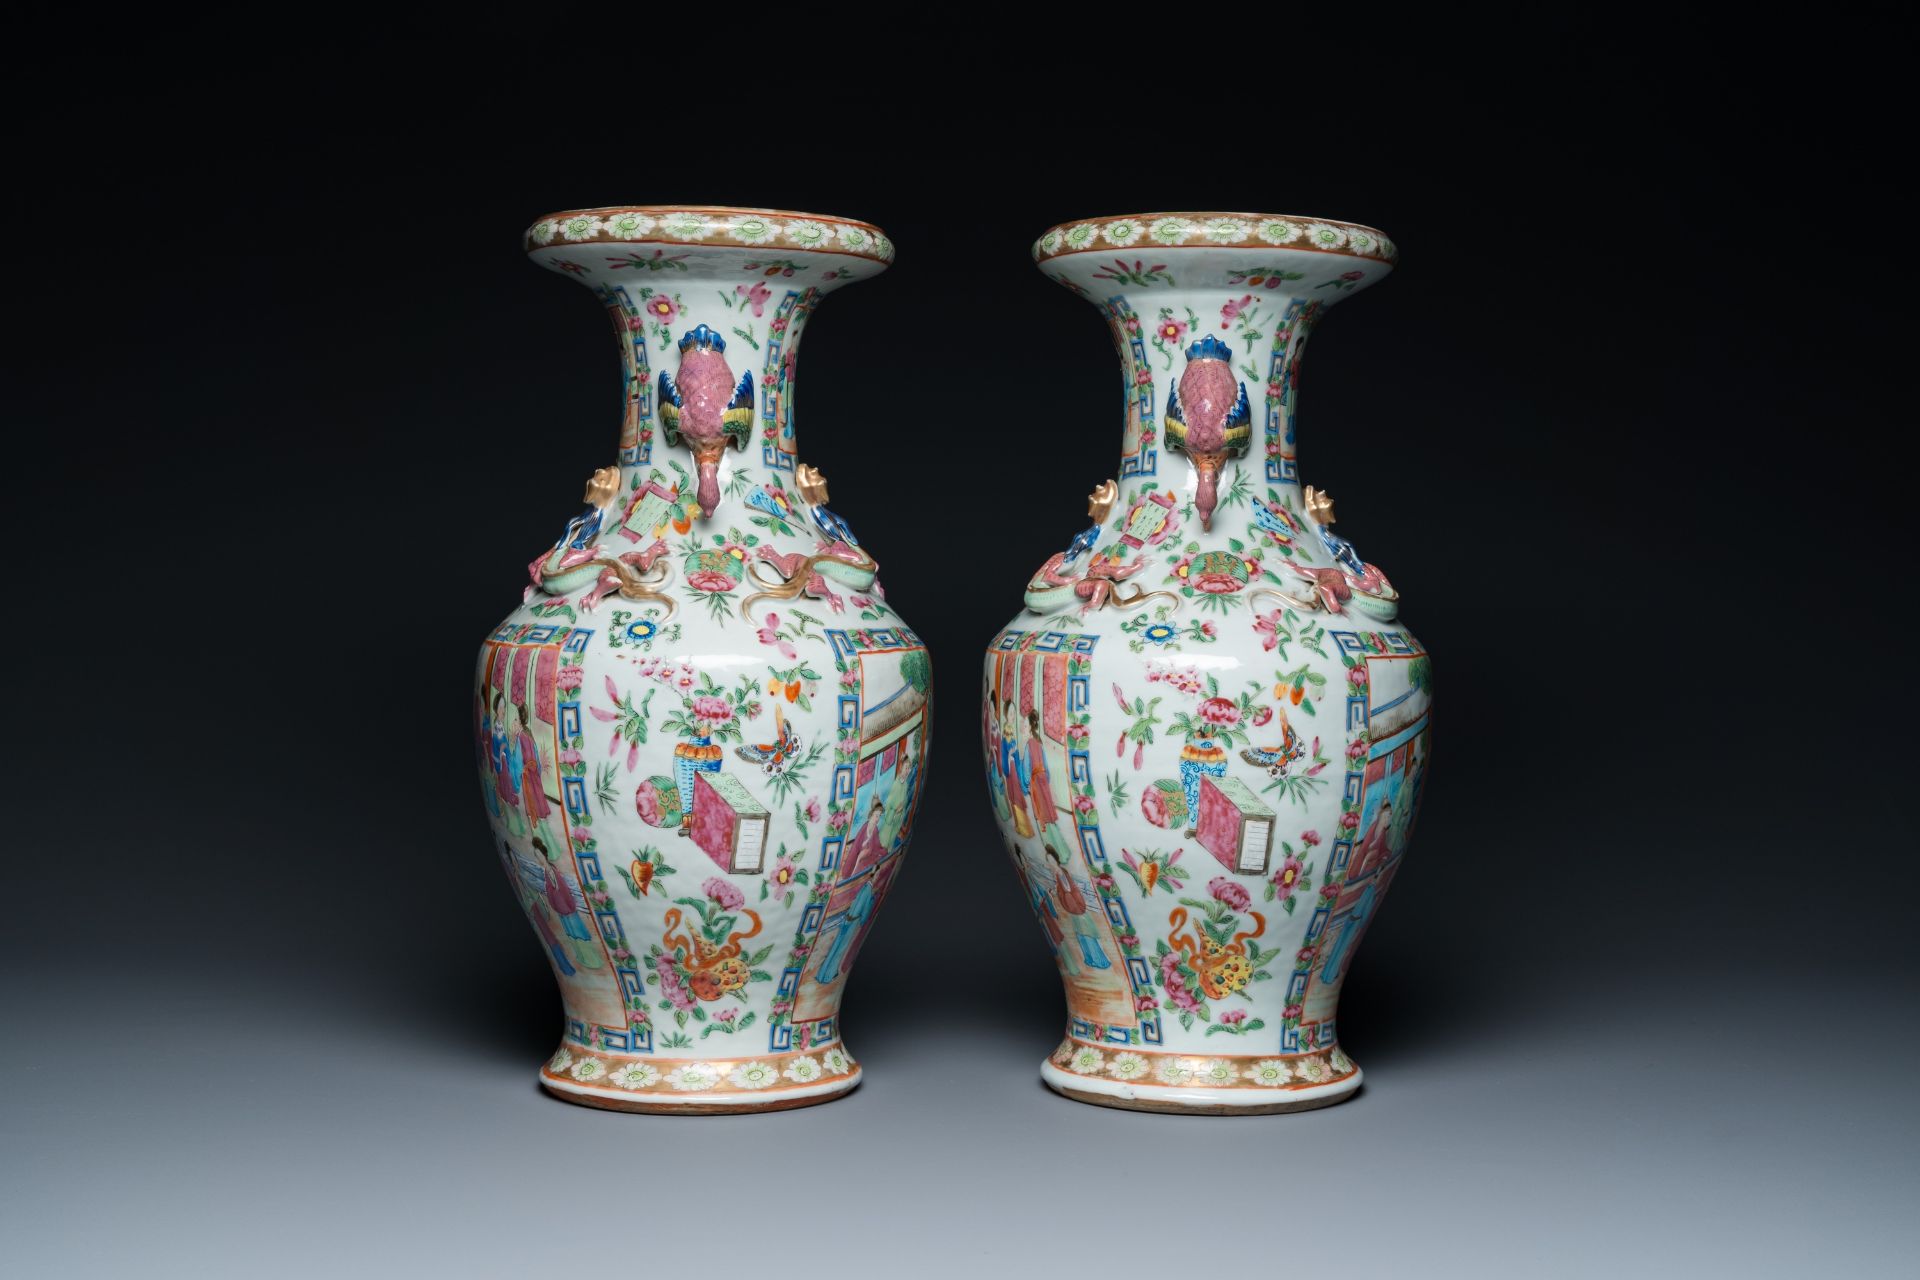 A pair of Chinese Canton famille rose vases with duck-shaped handles, 19th C. - Image 5 of 7